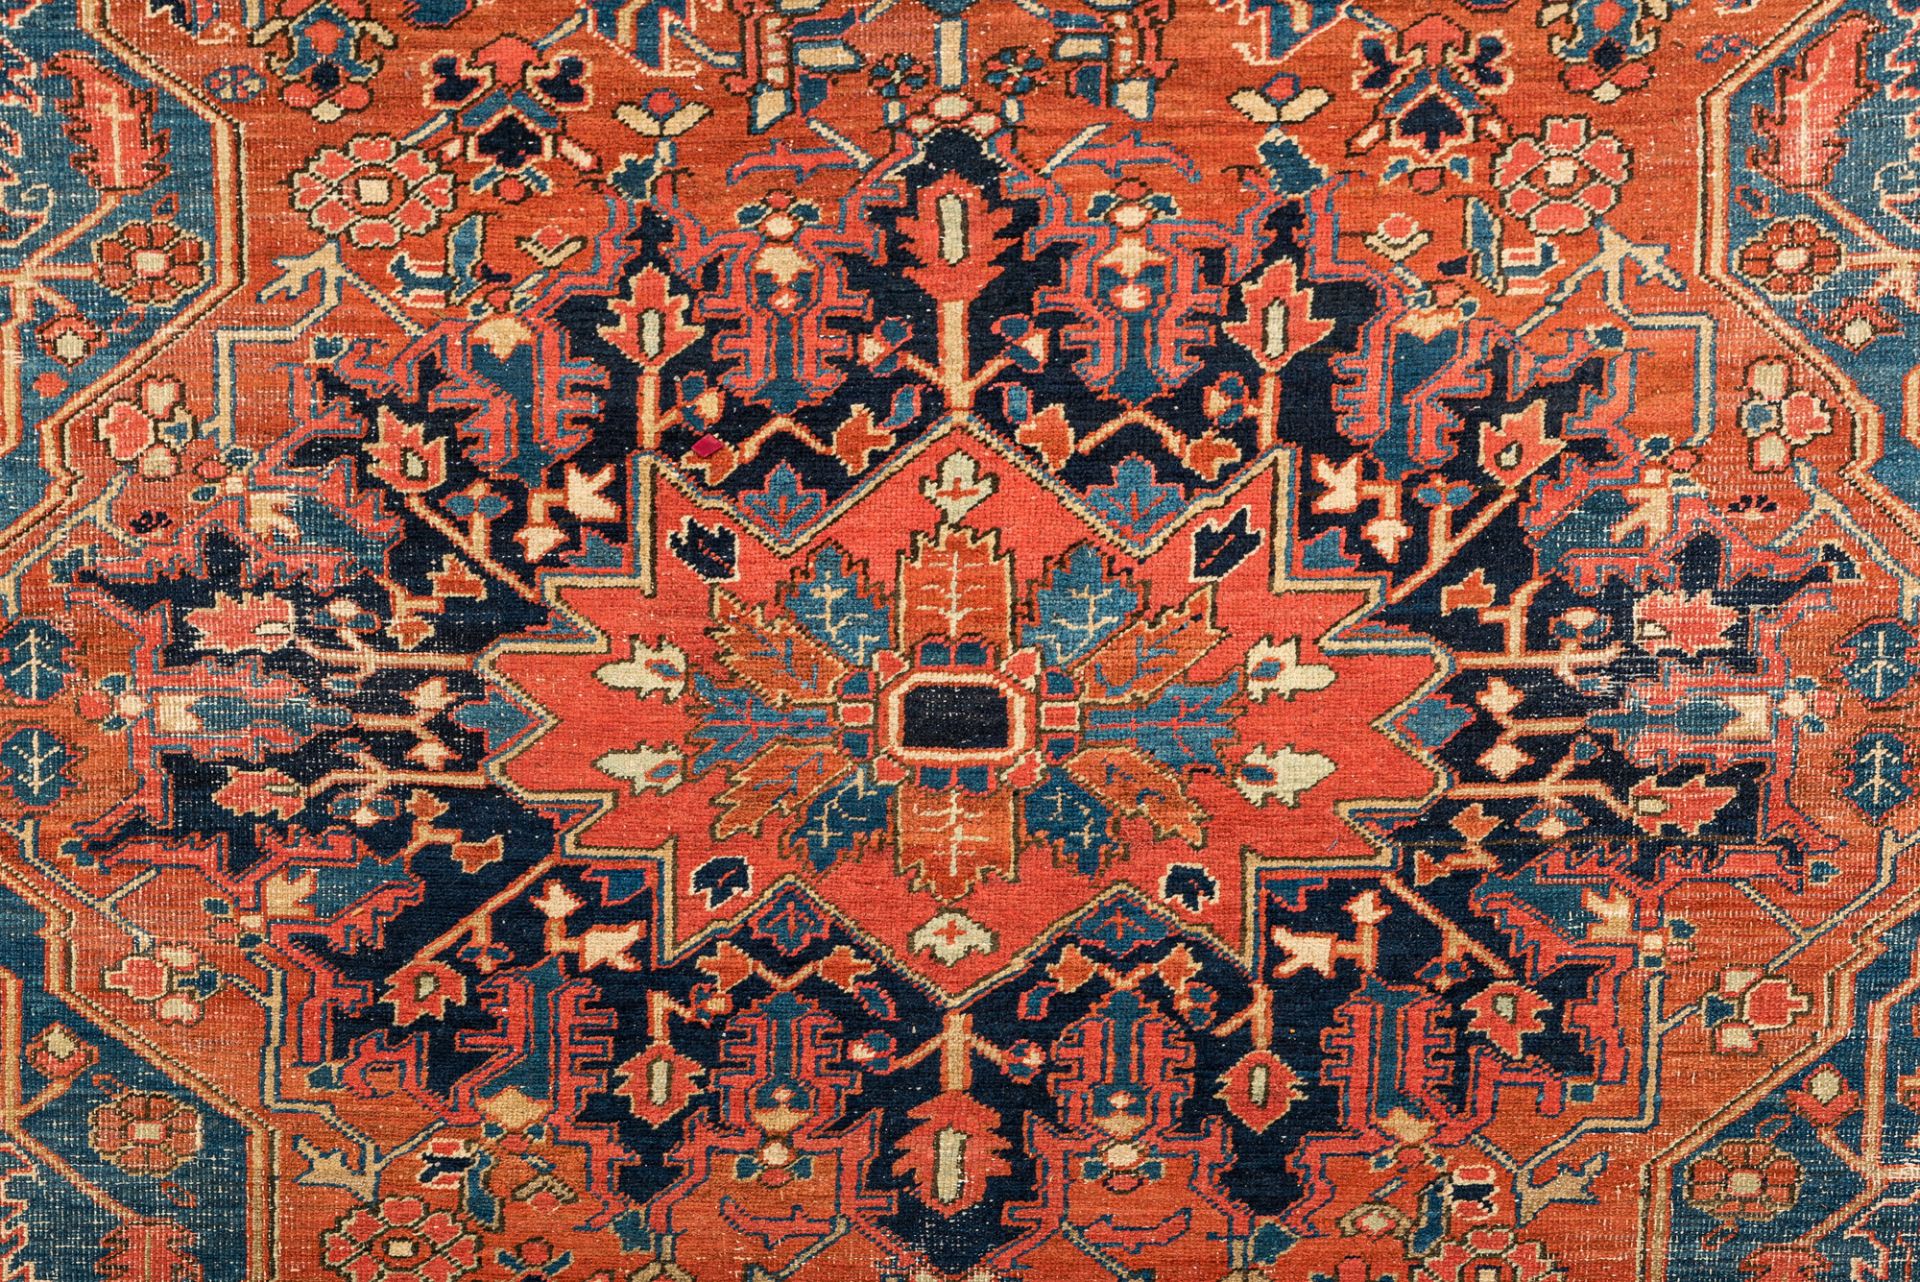 A Persian Heriz rug with floral design and geometric motifs, wool on cotton, 1st half 20th C. - Image 2 of 2